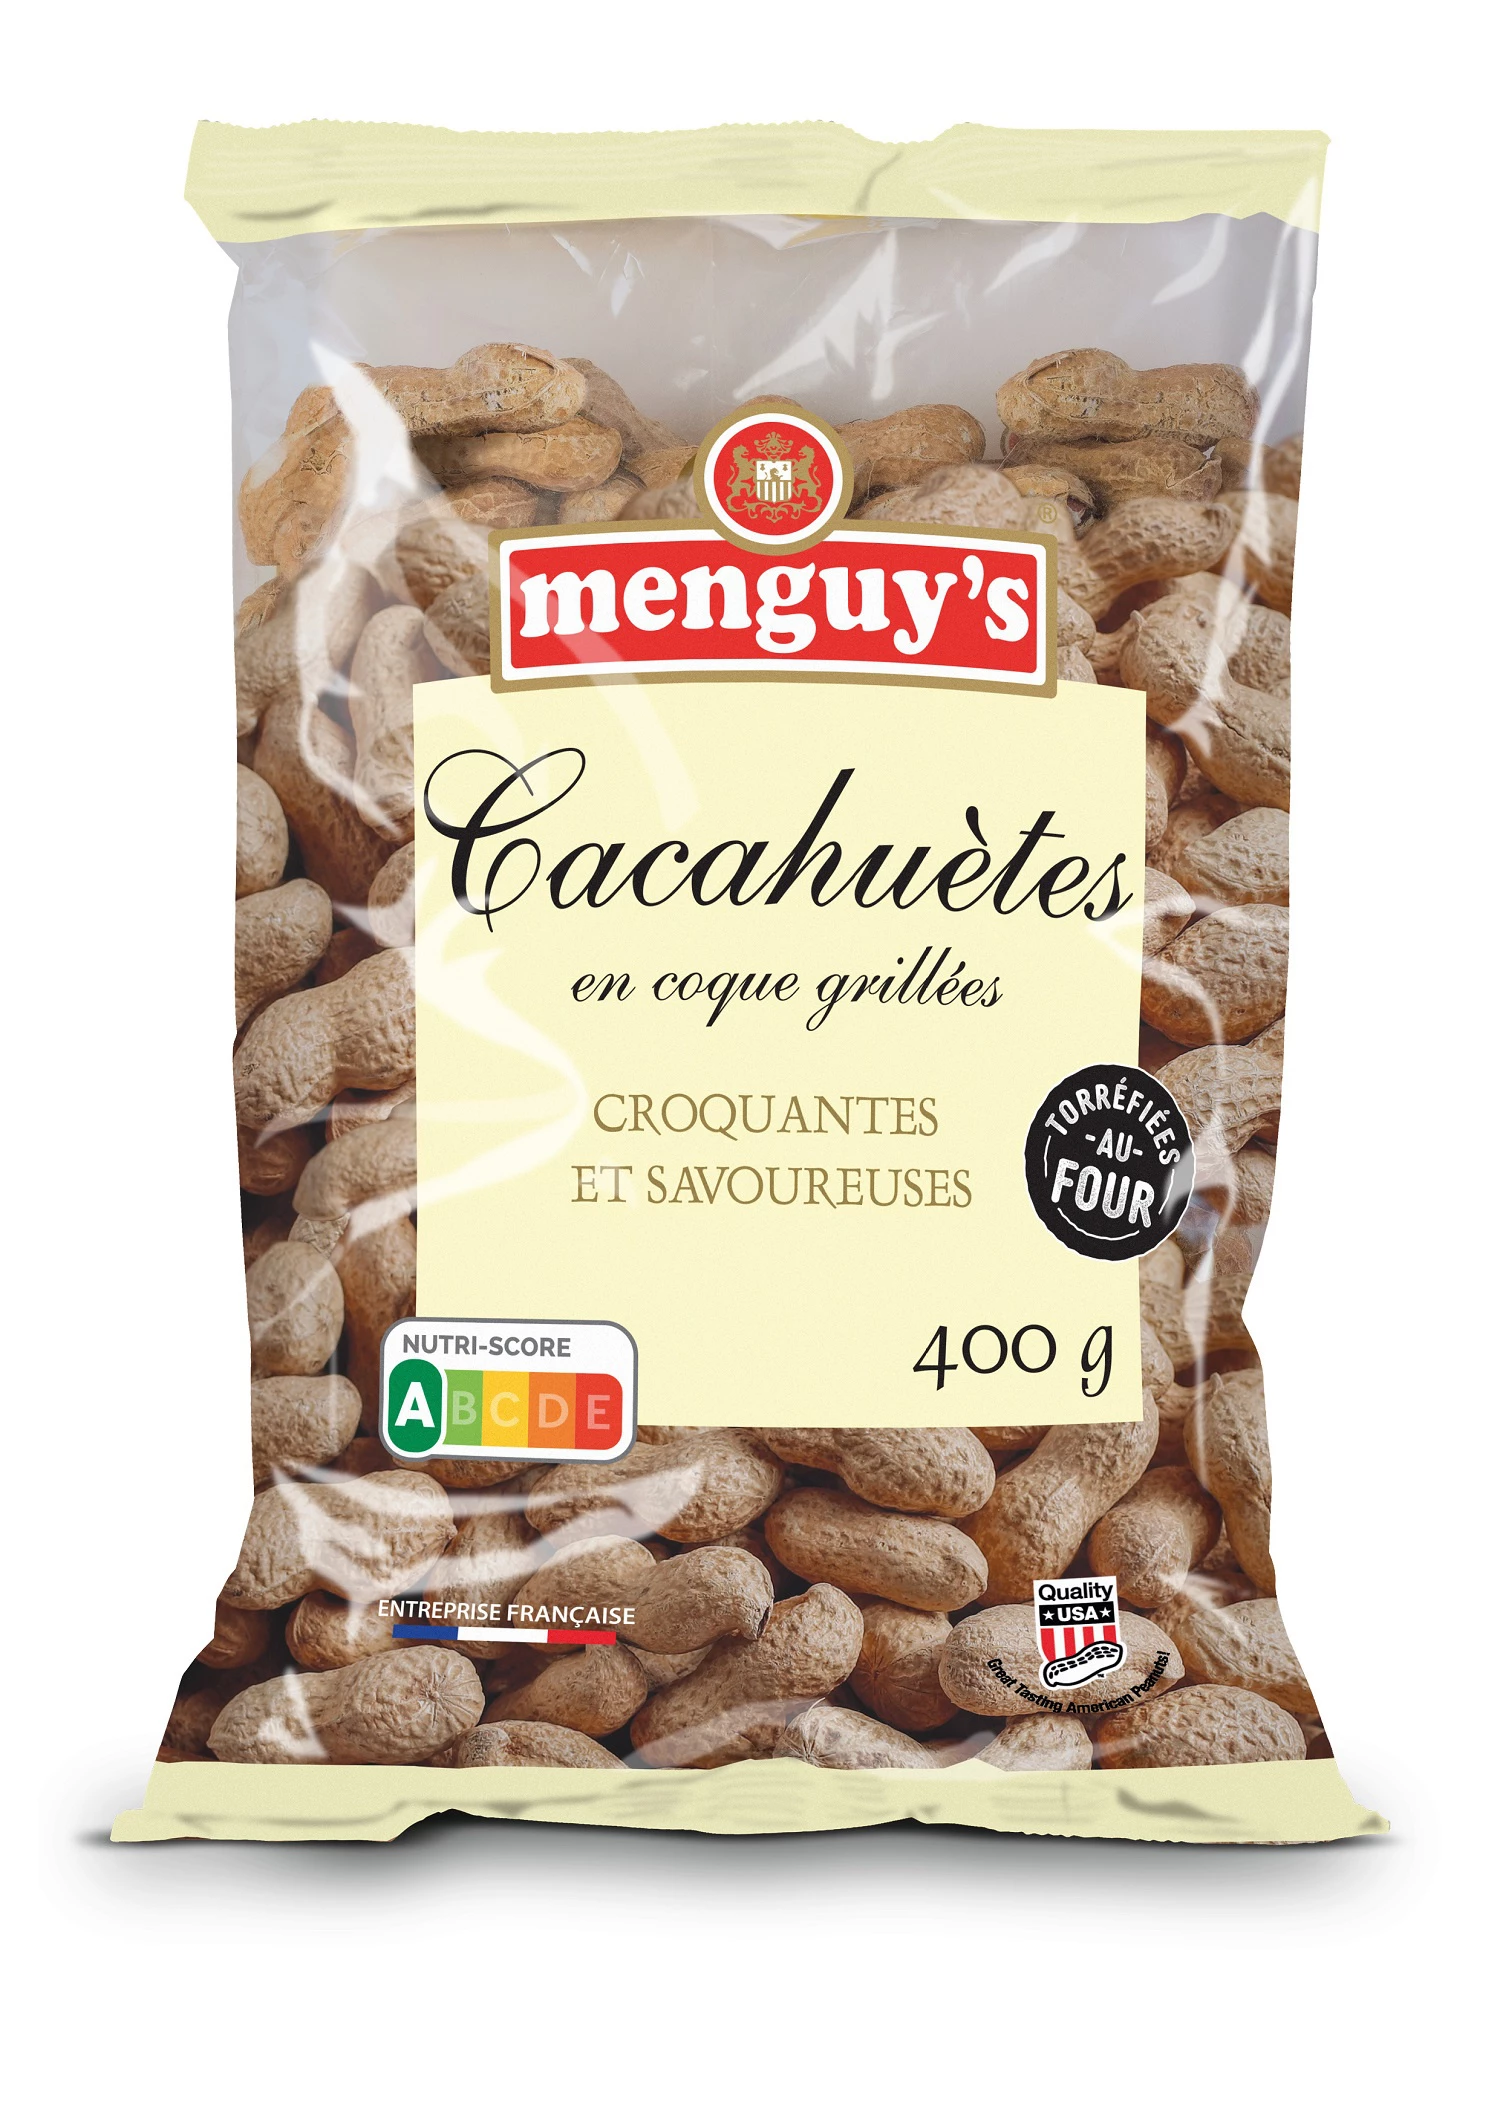 Menguys Cacahuetes Coques 400g